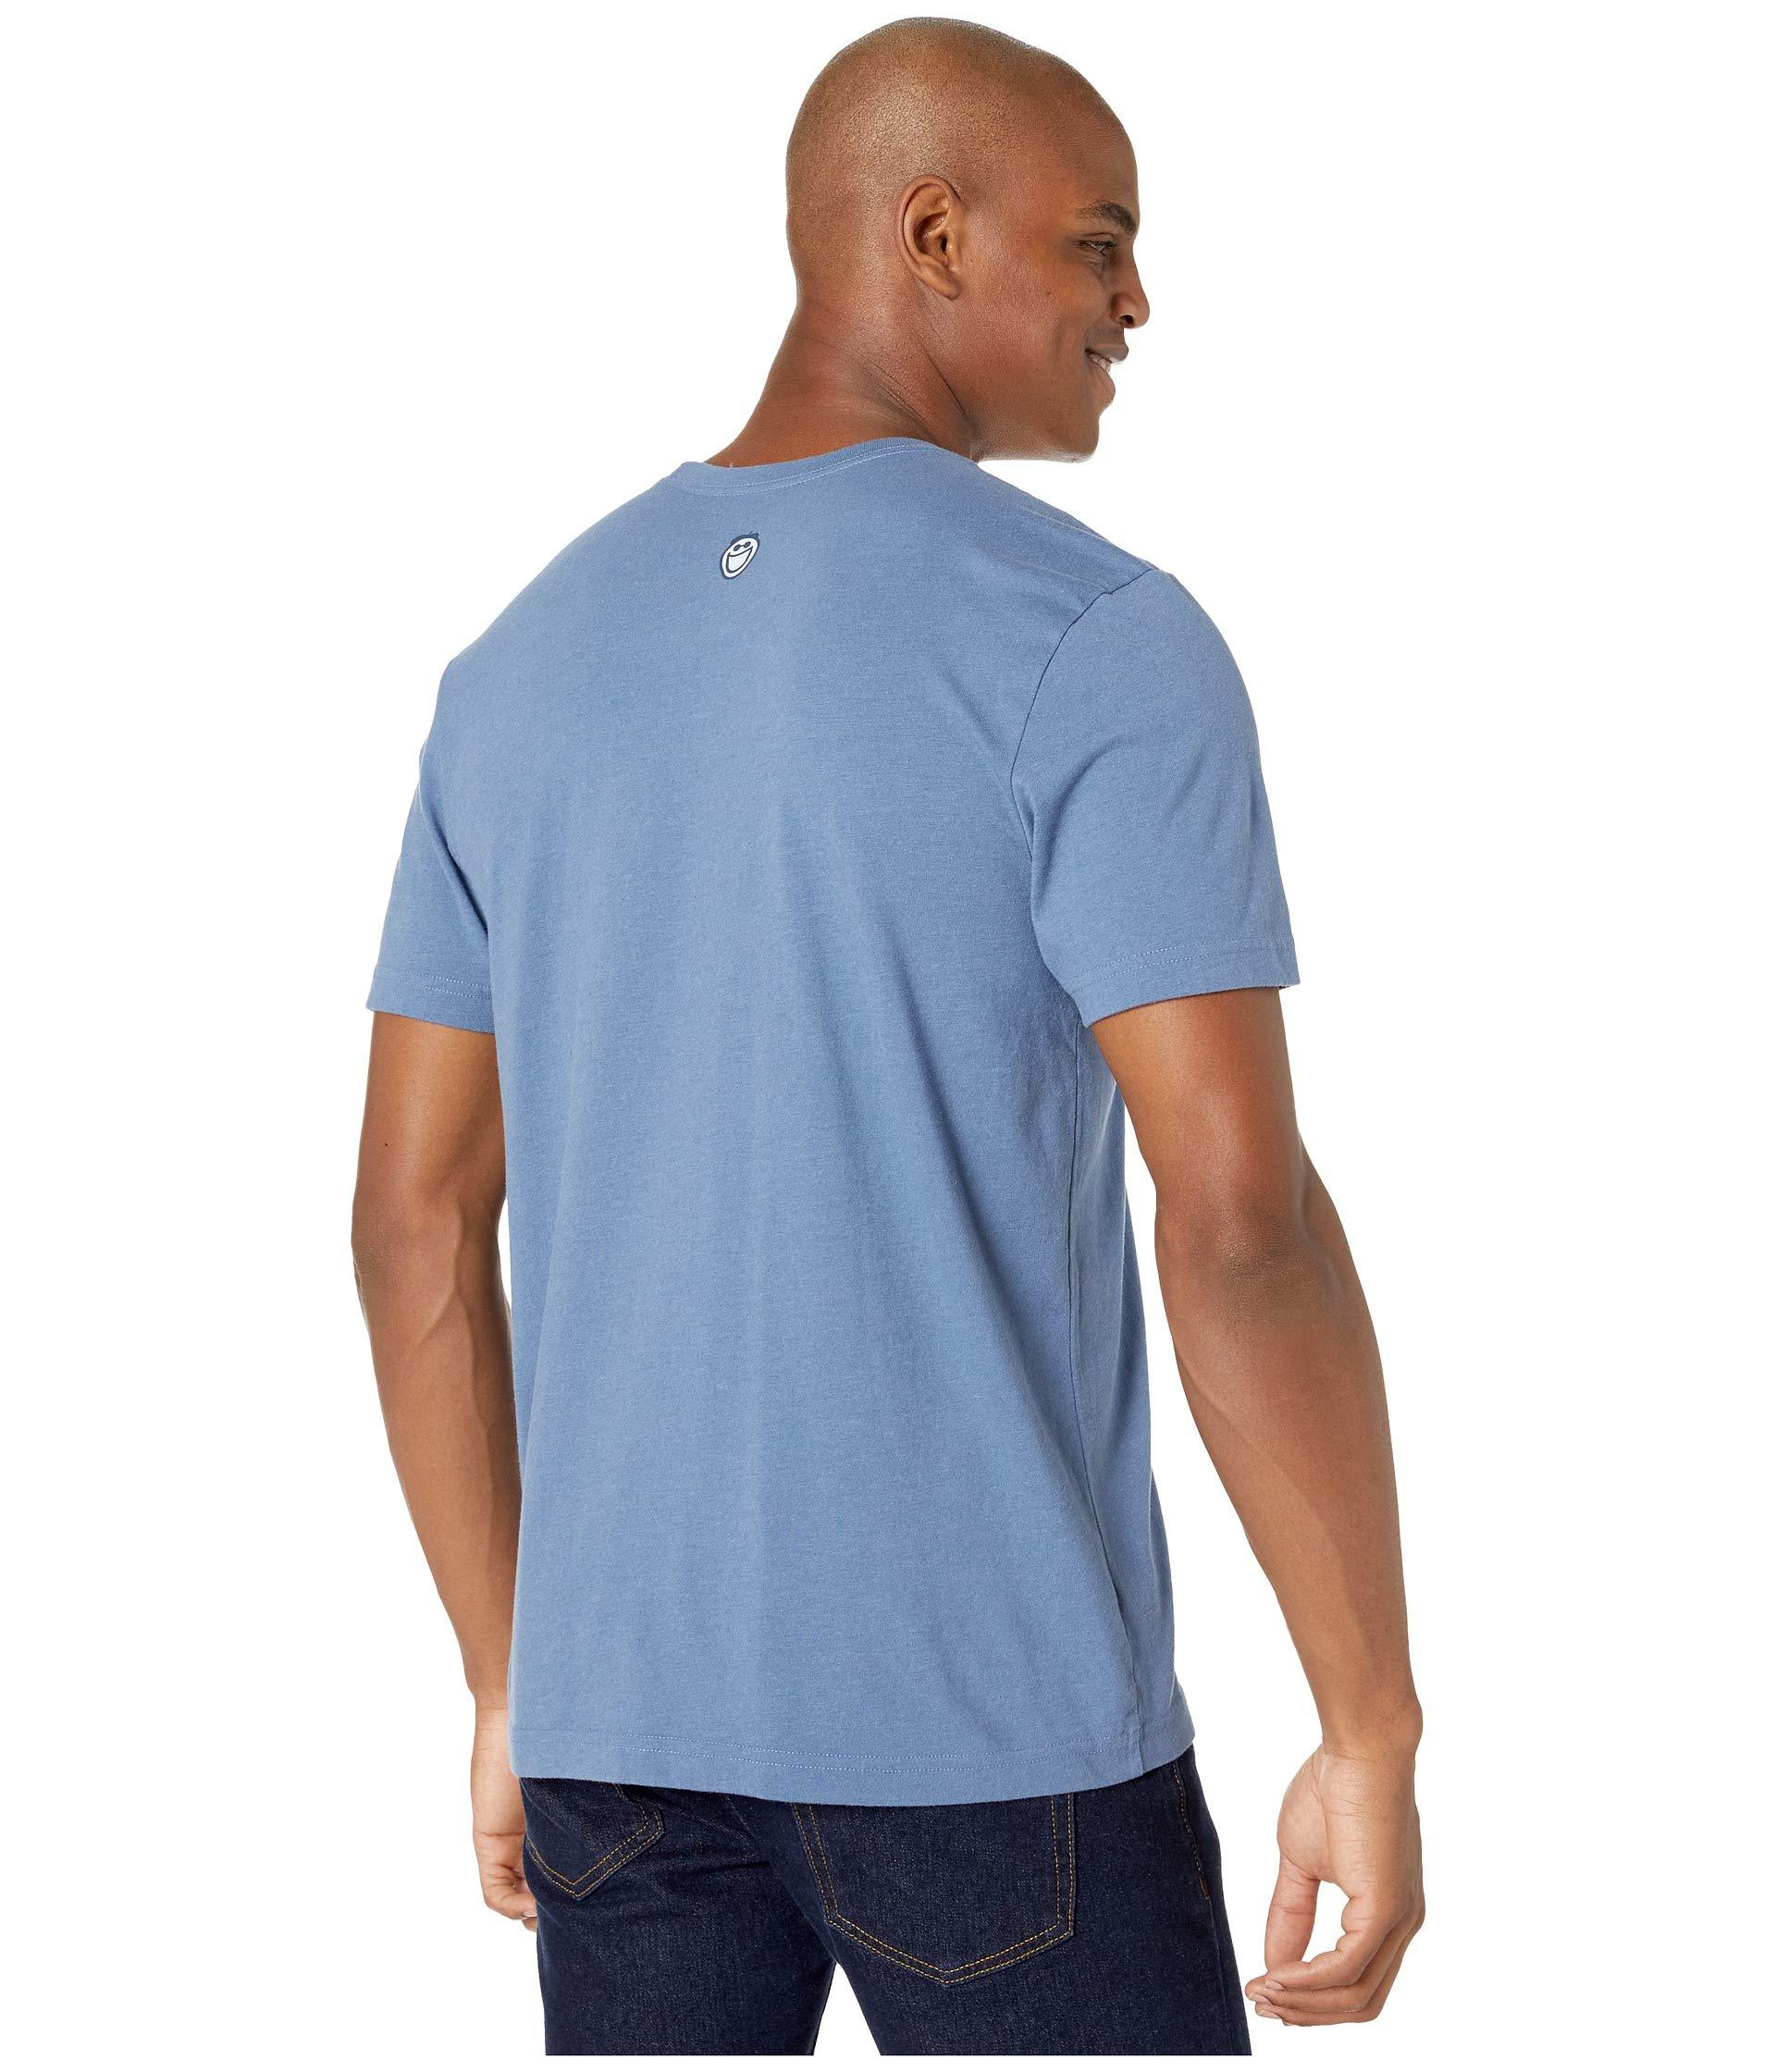 Life Is Good. Cotton Golf Jake Crushertm Tee in Blue for Men - Lyst